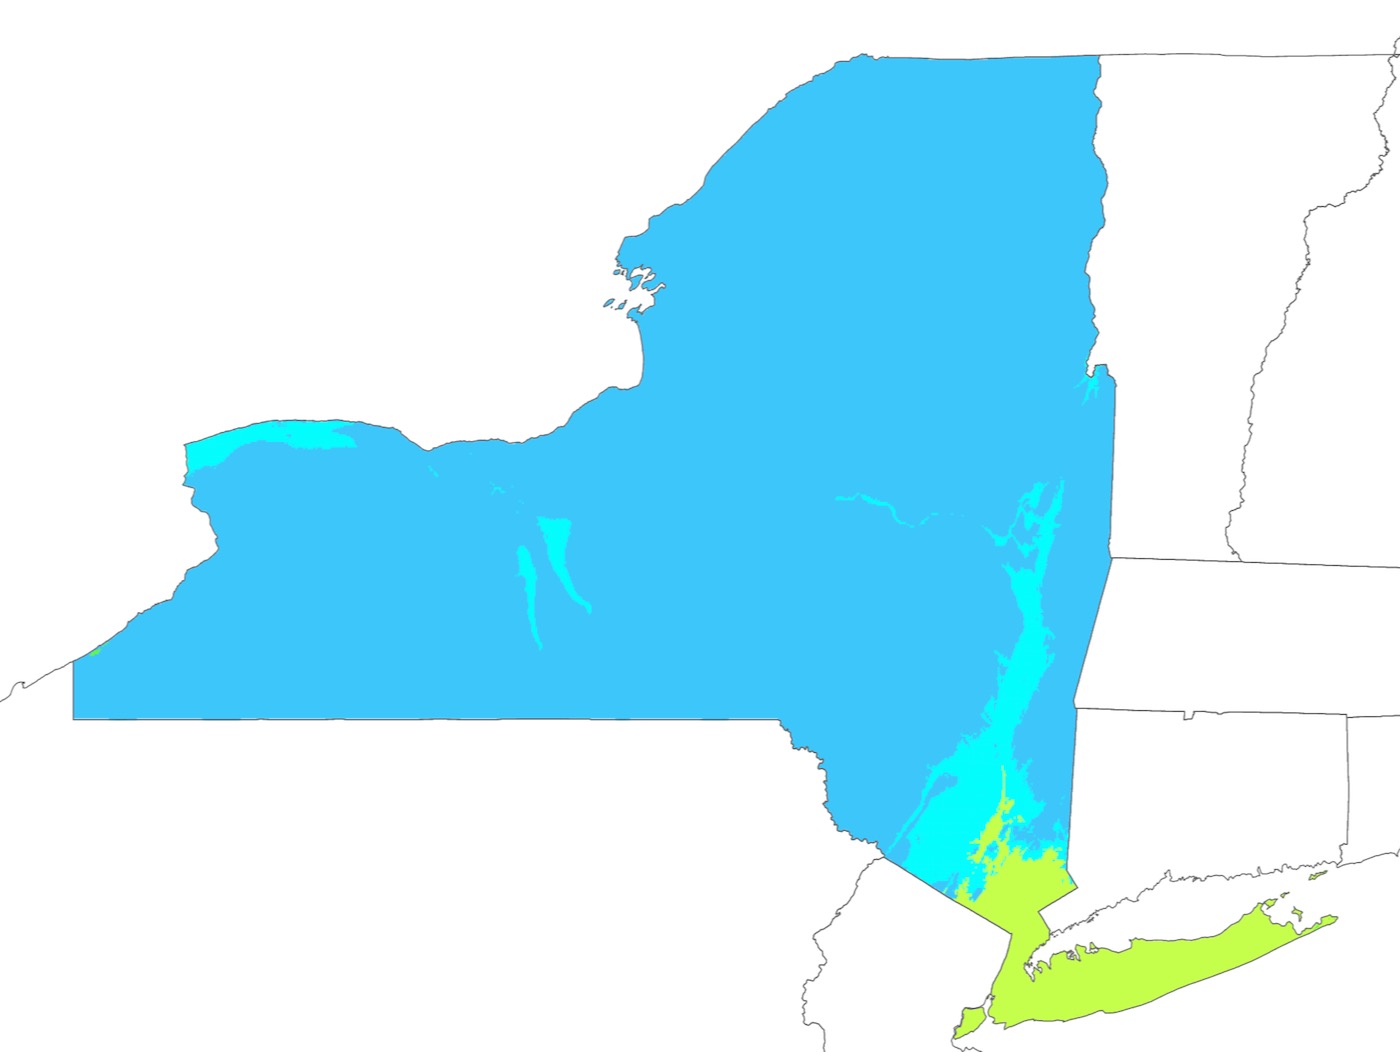 New York climate zone map